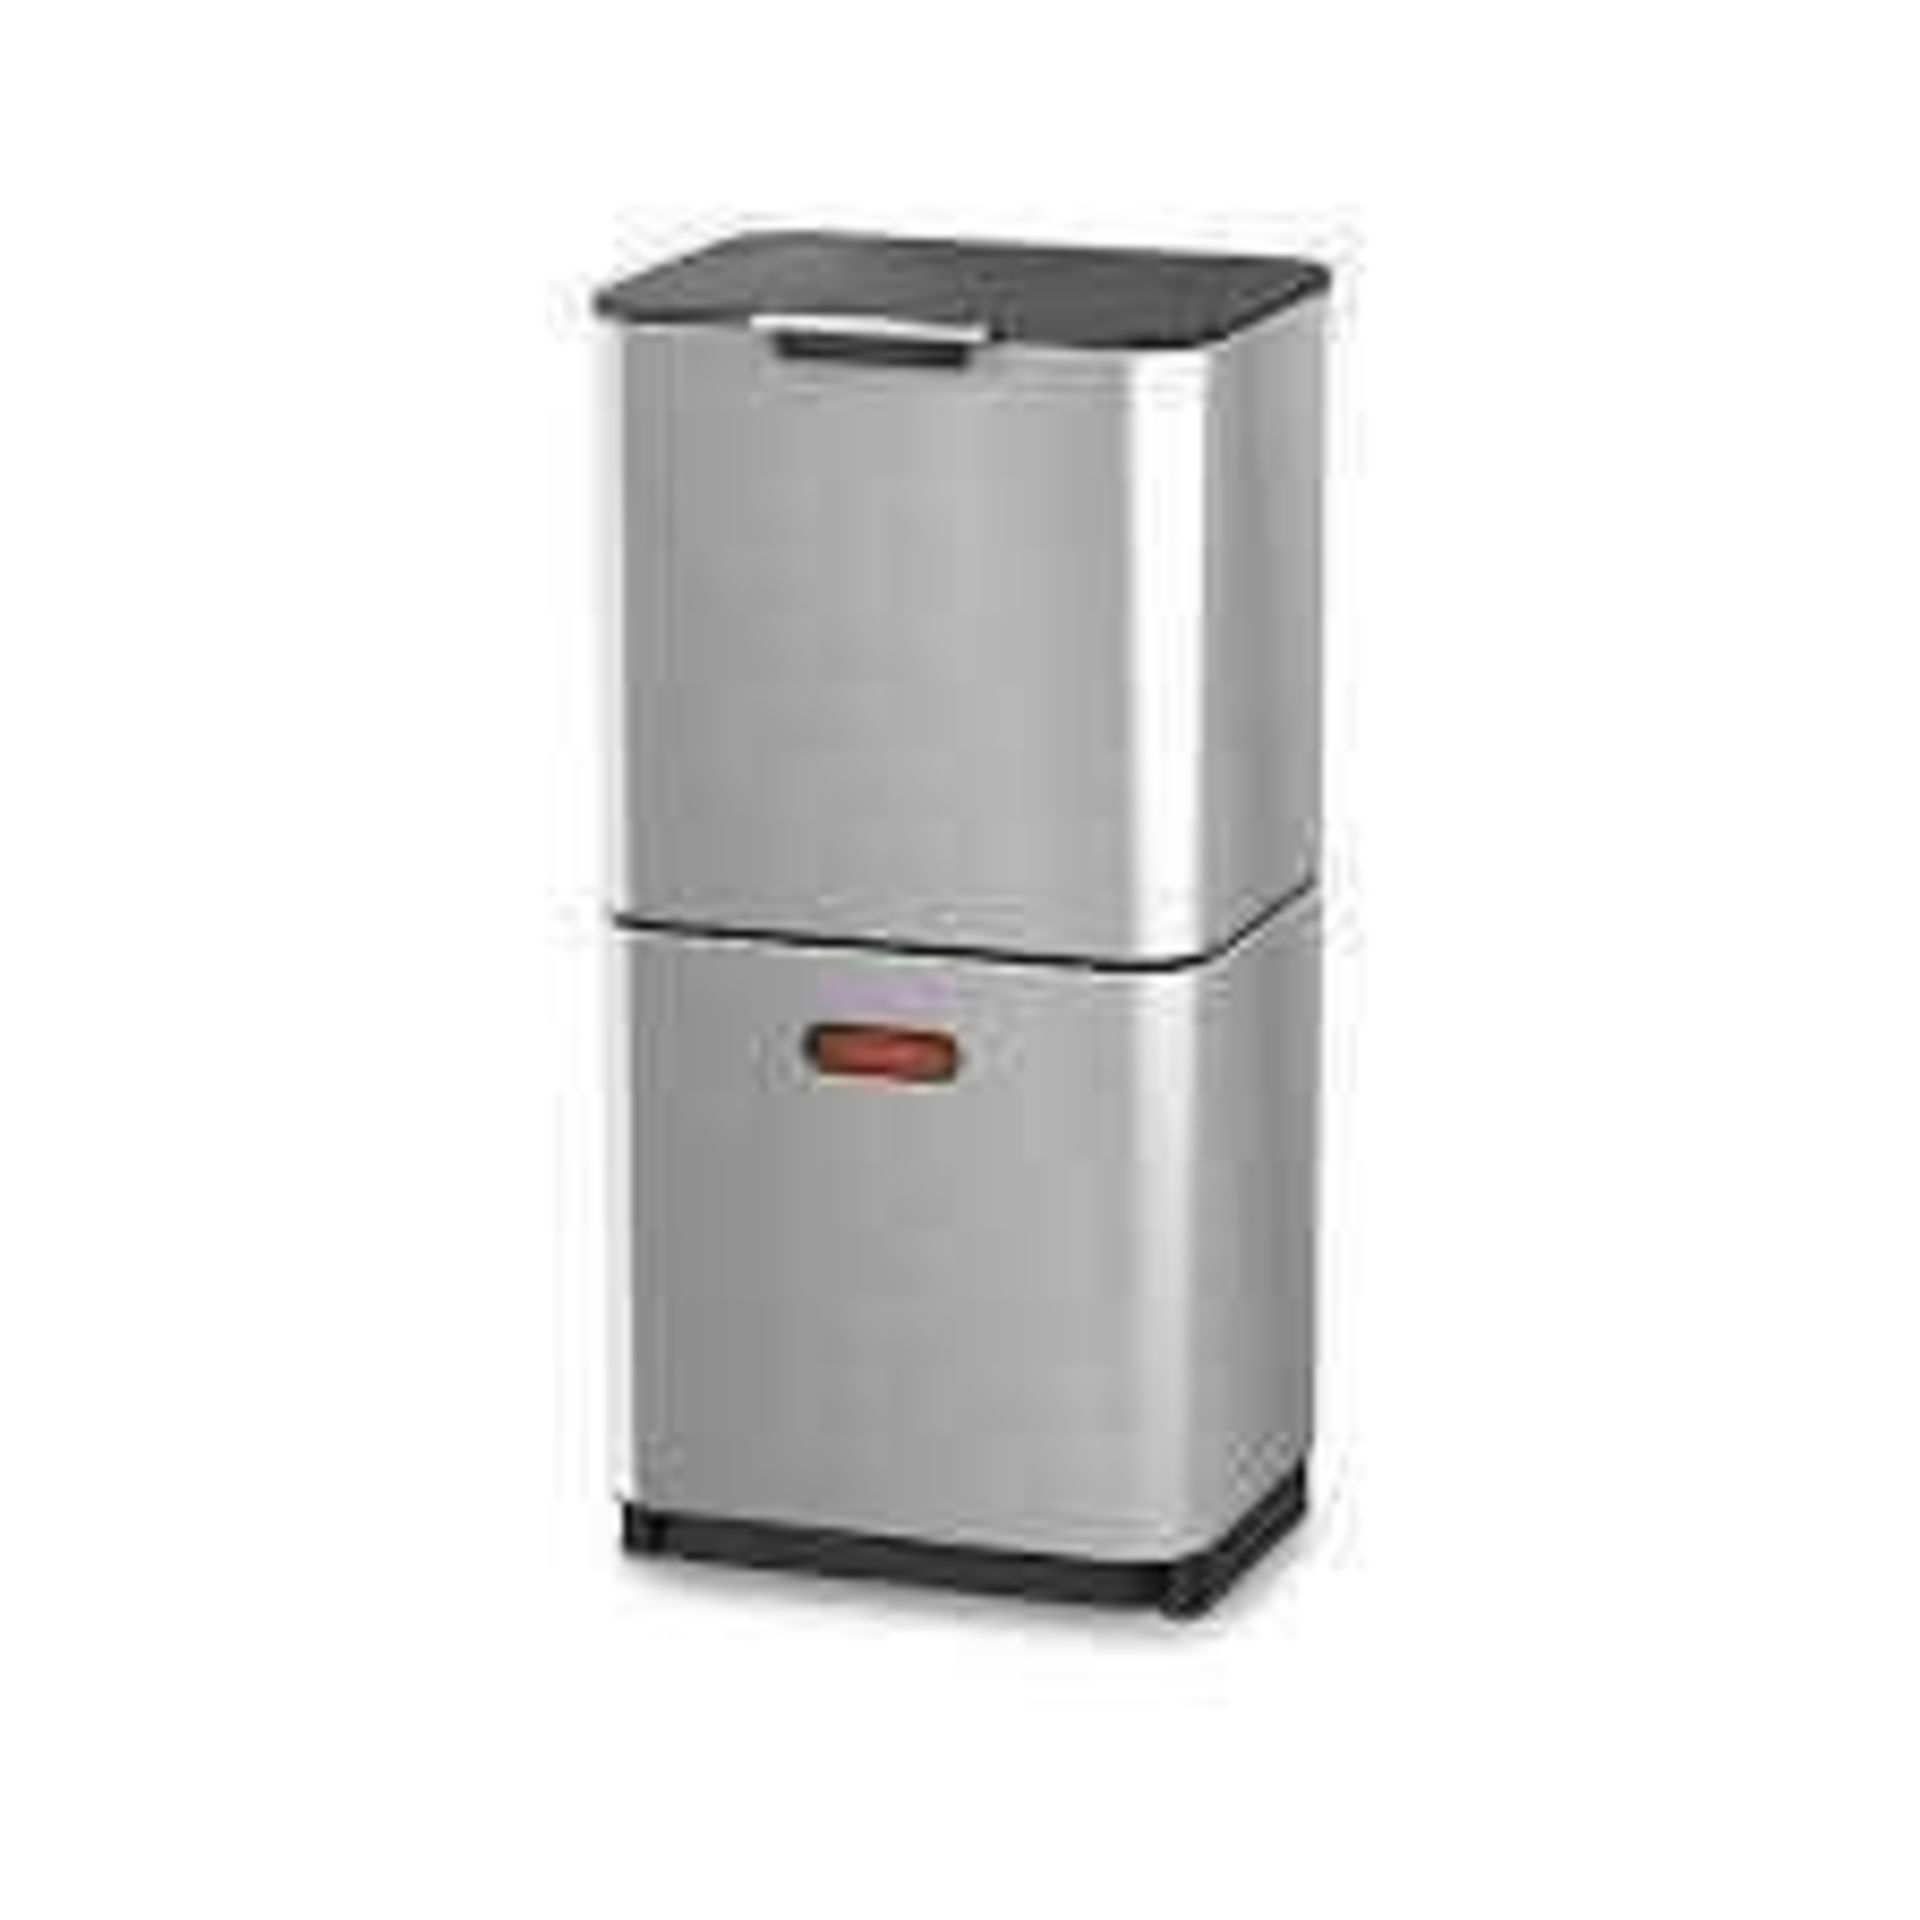 RRP £180 Boxed Joseph Joseph Totem Max Waste Separation And Recycling Unit 495417 (Appraisal